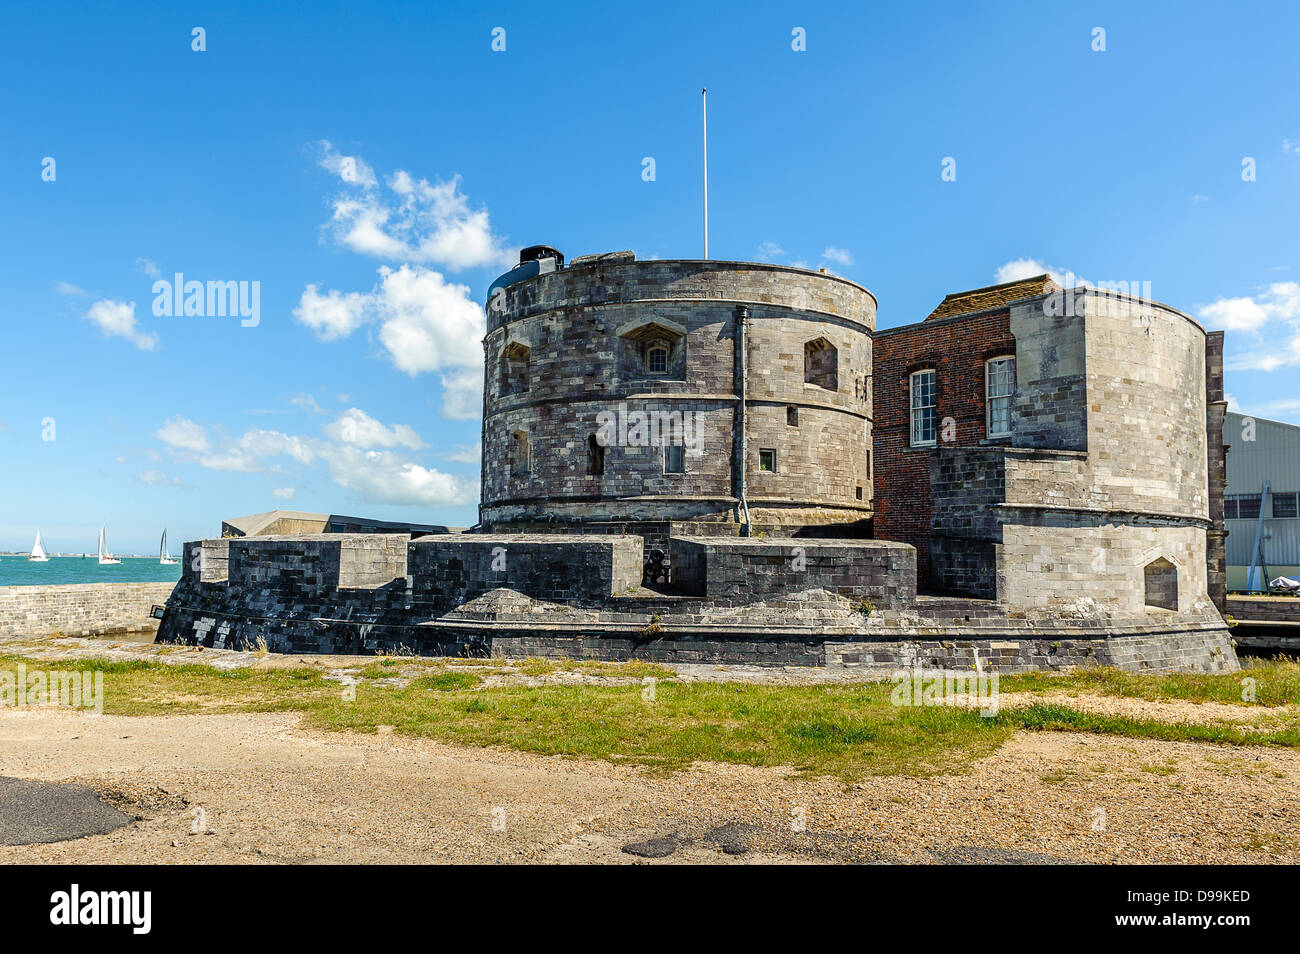 Calshot Castle is one of Henry VIII's device forts, built on Calshot Spit at the Solent near Fawley to guard the entrance to Sou Stock Photo